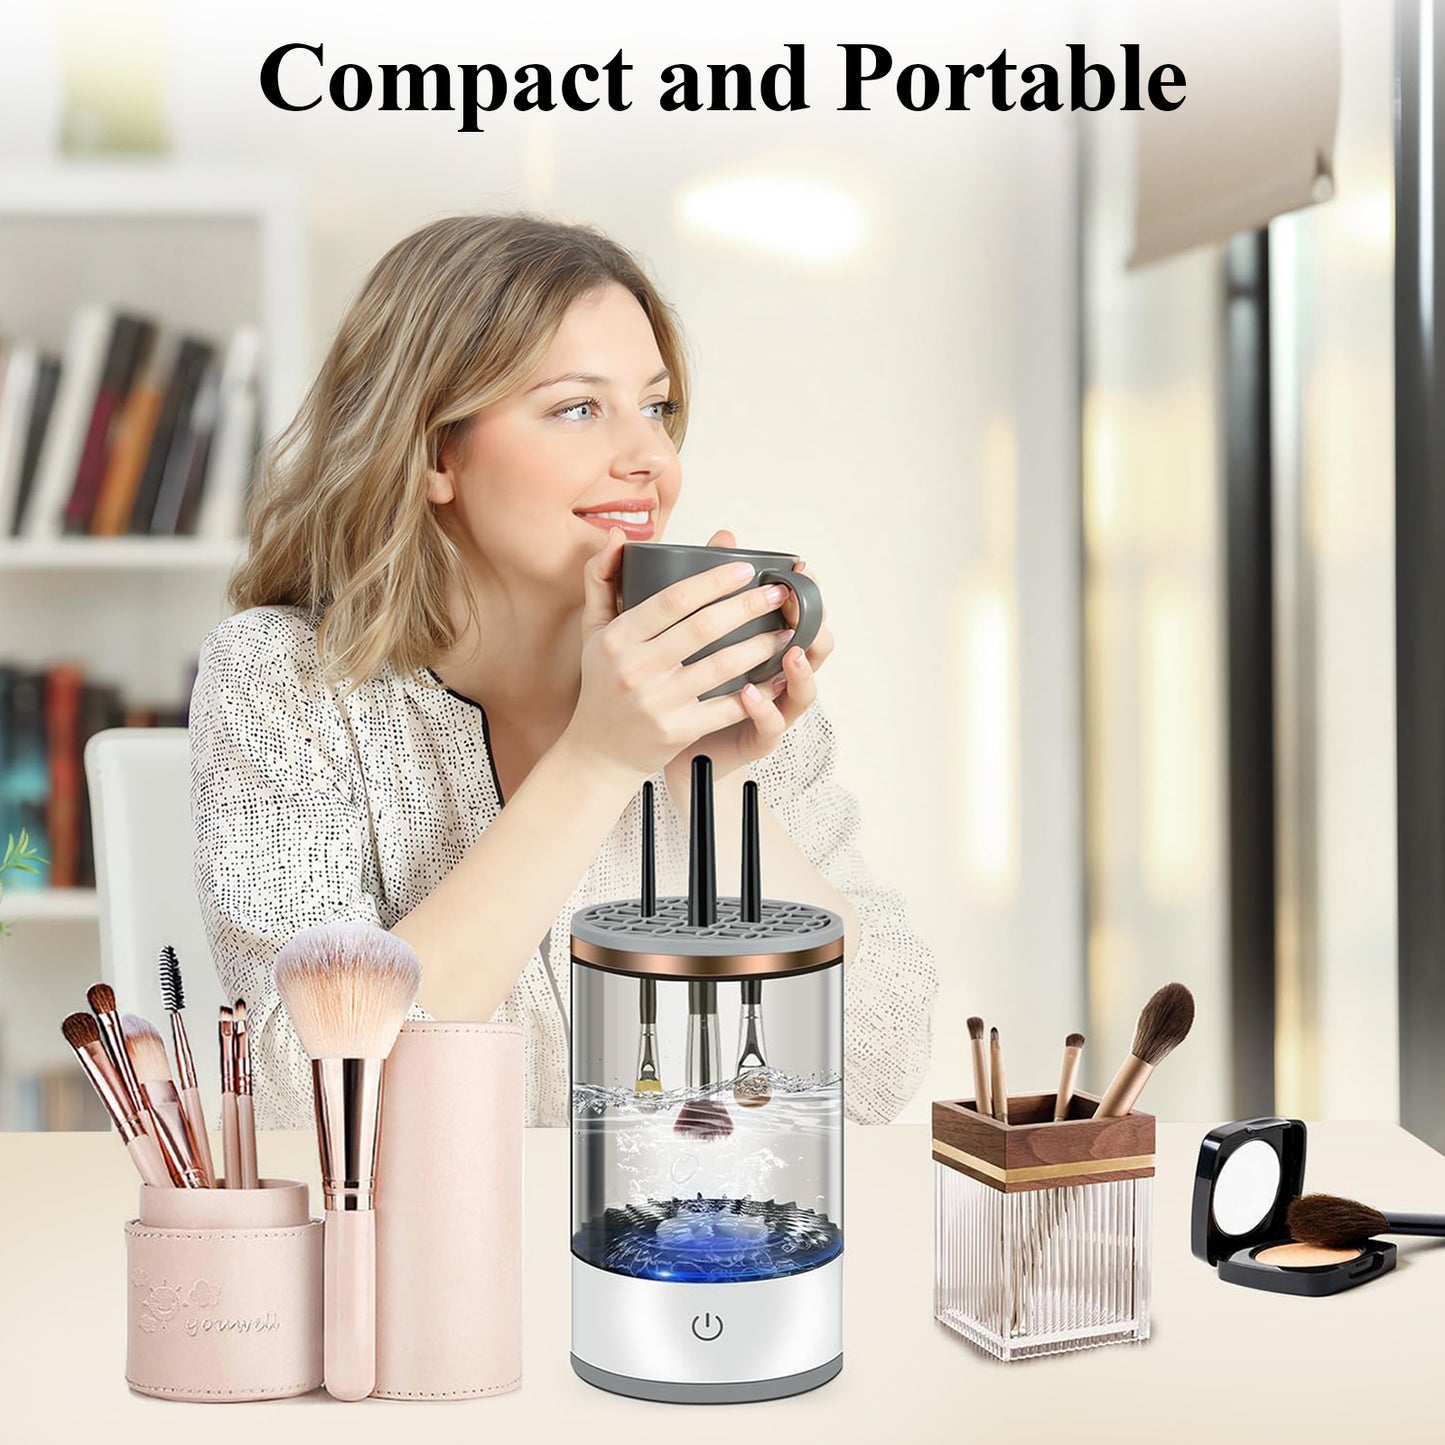 Electric Makeup Brush Cleaner - Portable Electric Makeup Brush Cleaner Machine,USB power with Cosmetic Brush Cleaner Silicone Mat,Beauty Tools for Mother's Day & Christmas Gift